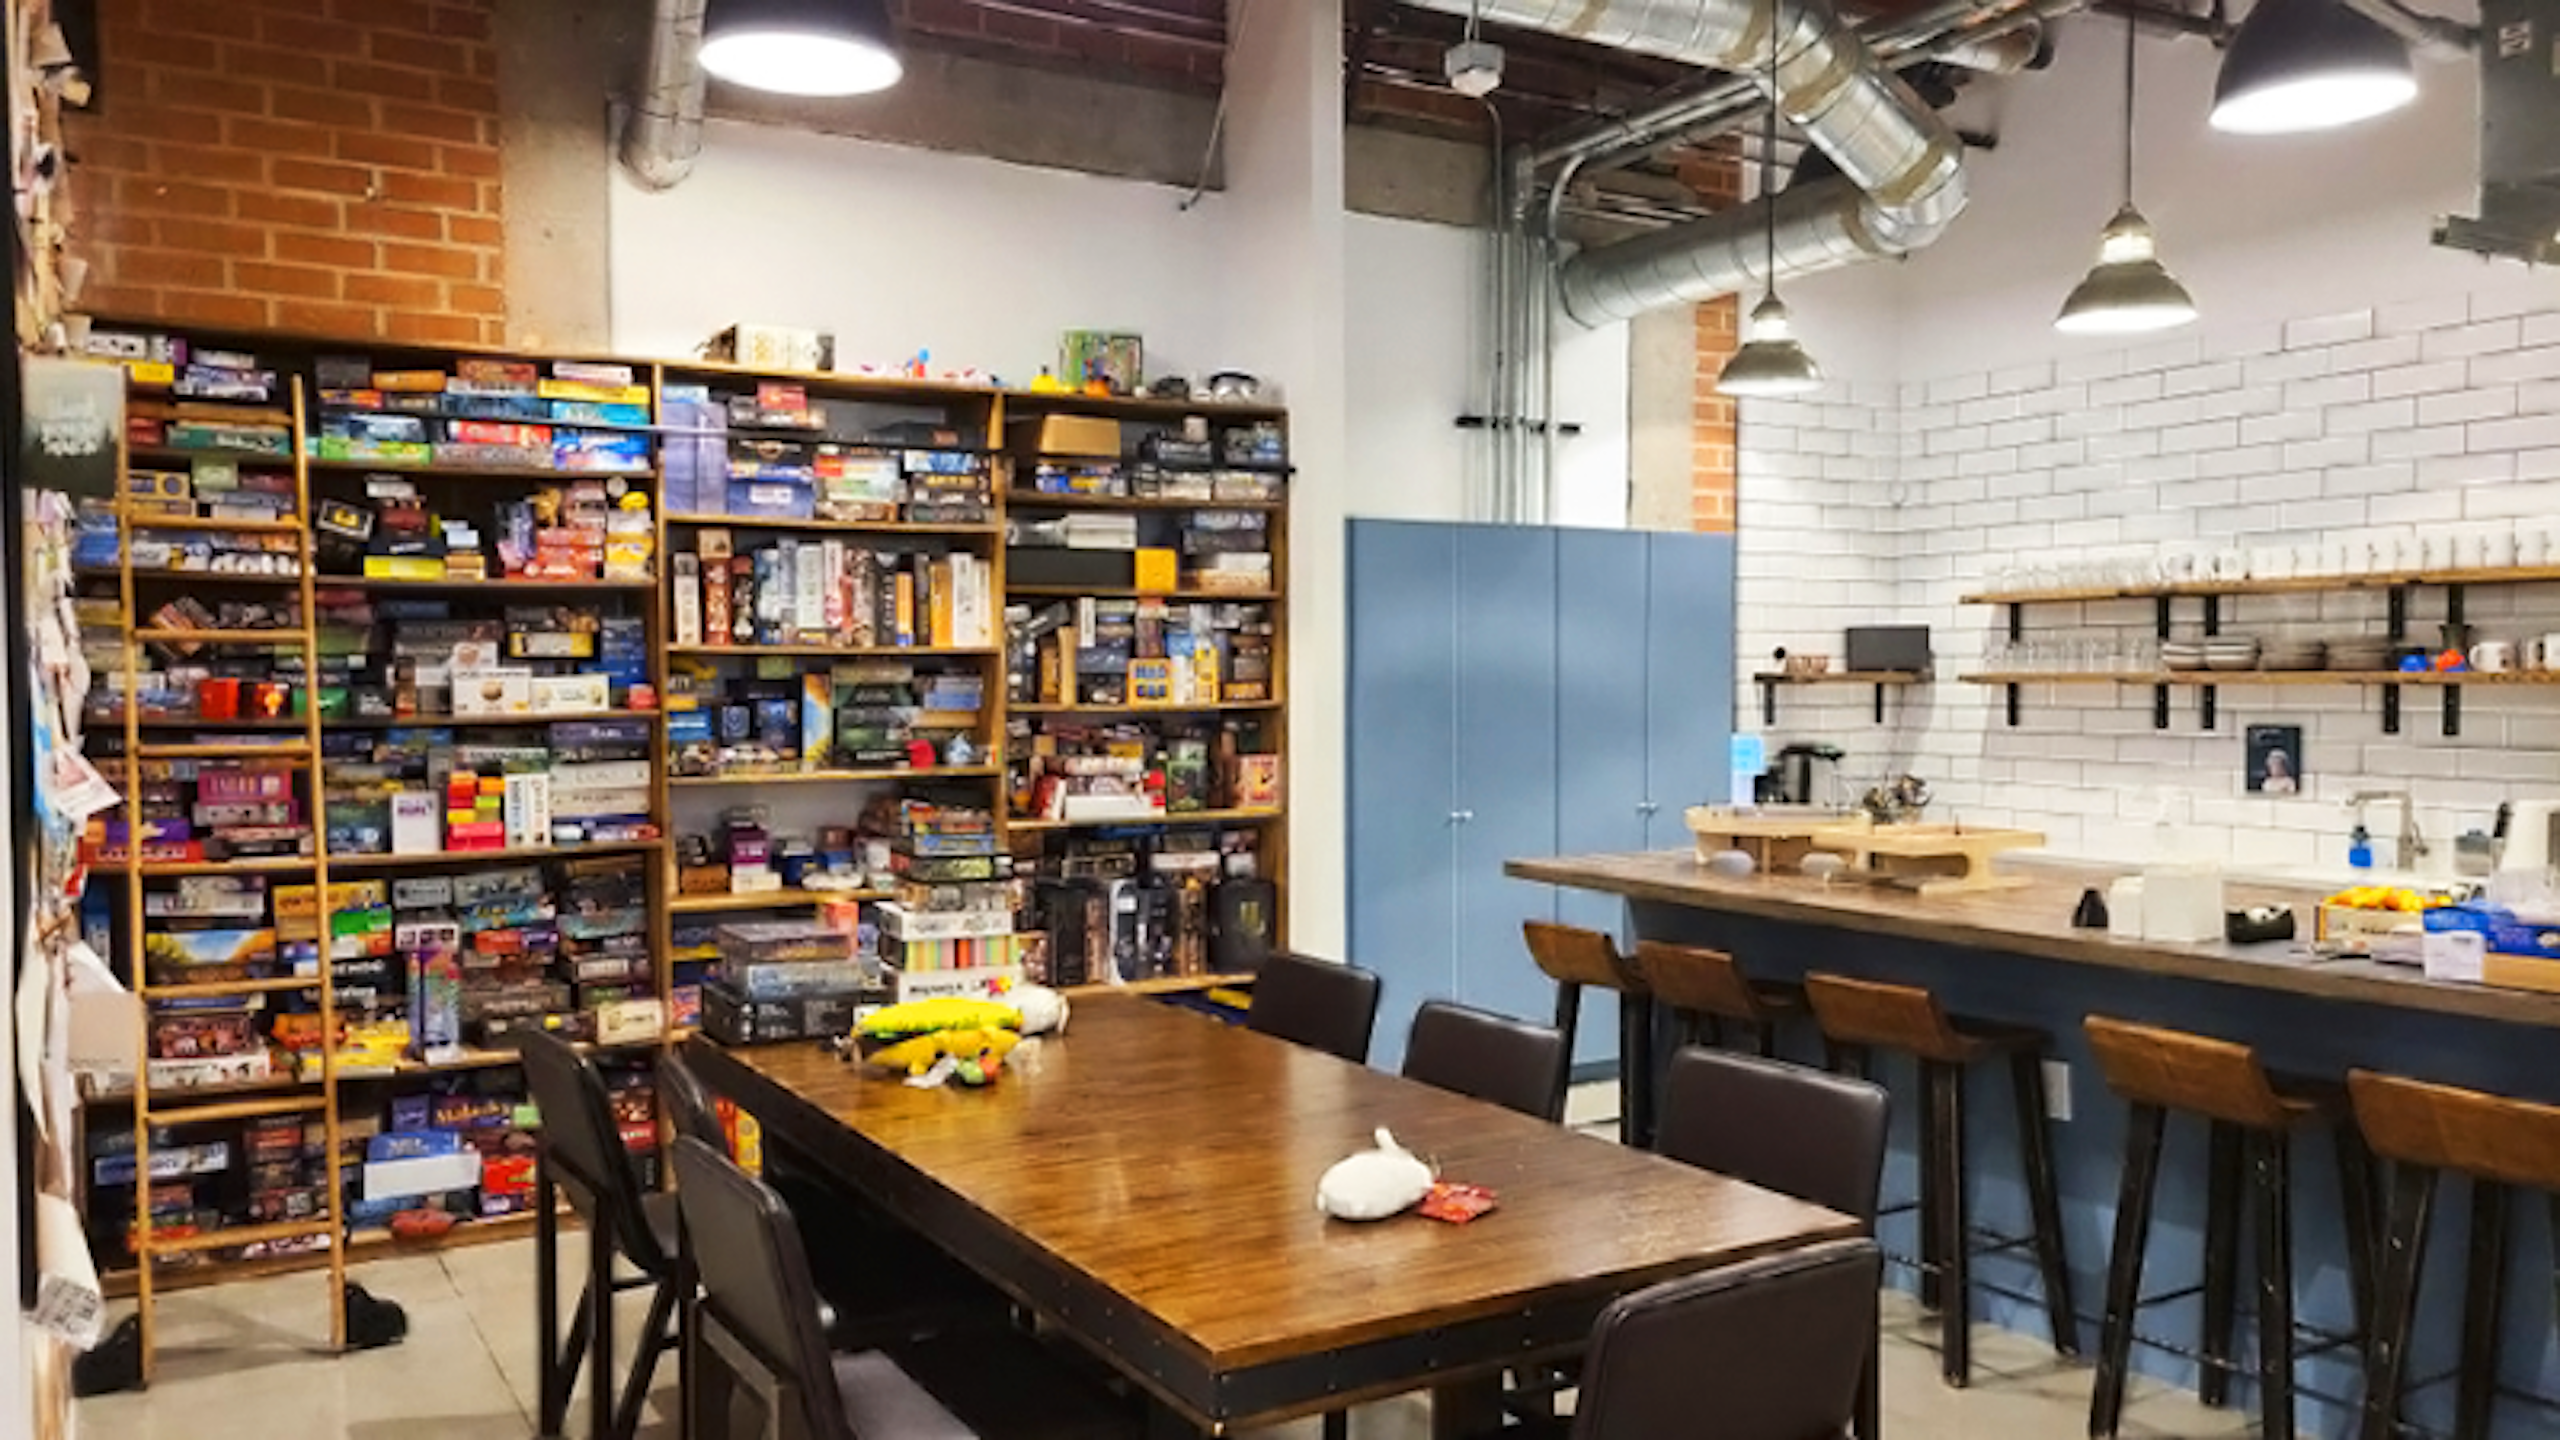 A look inside the Exploding Kittens’ office.